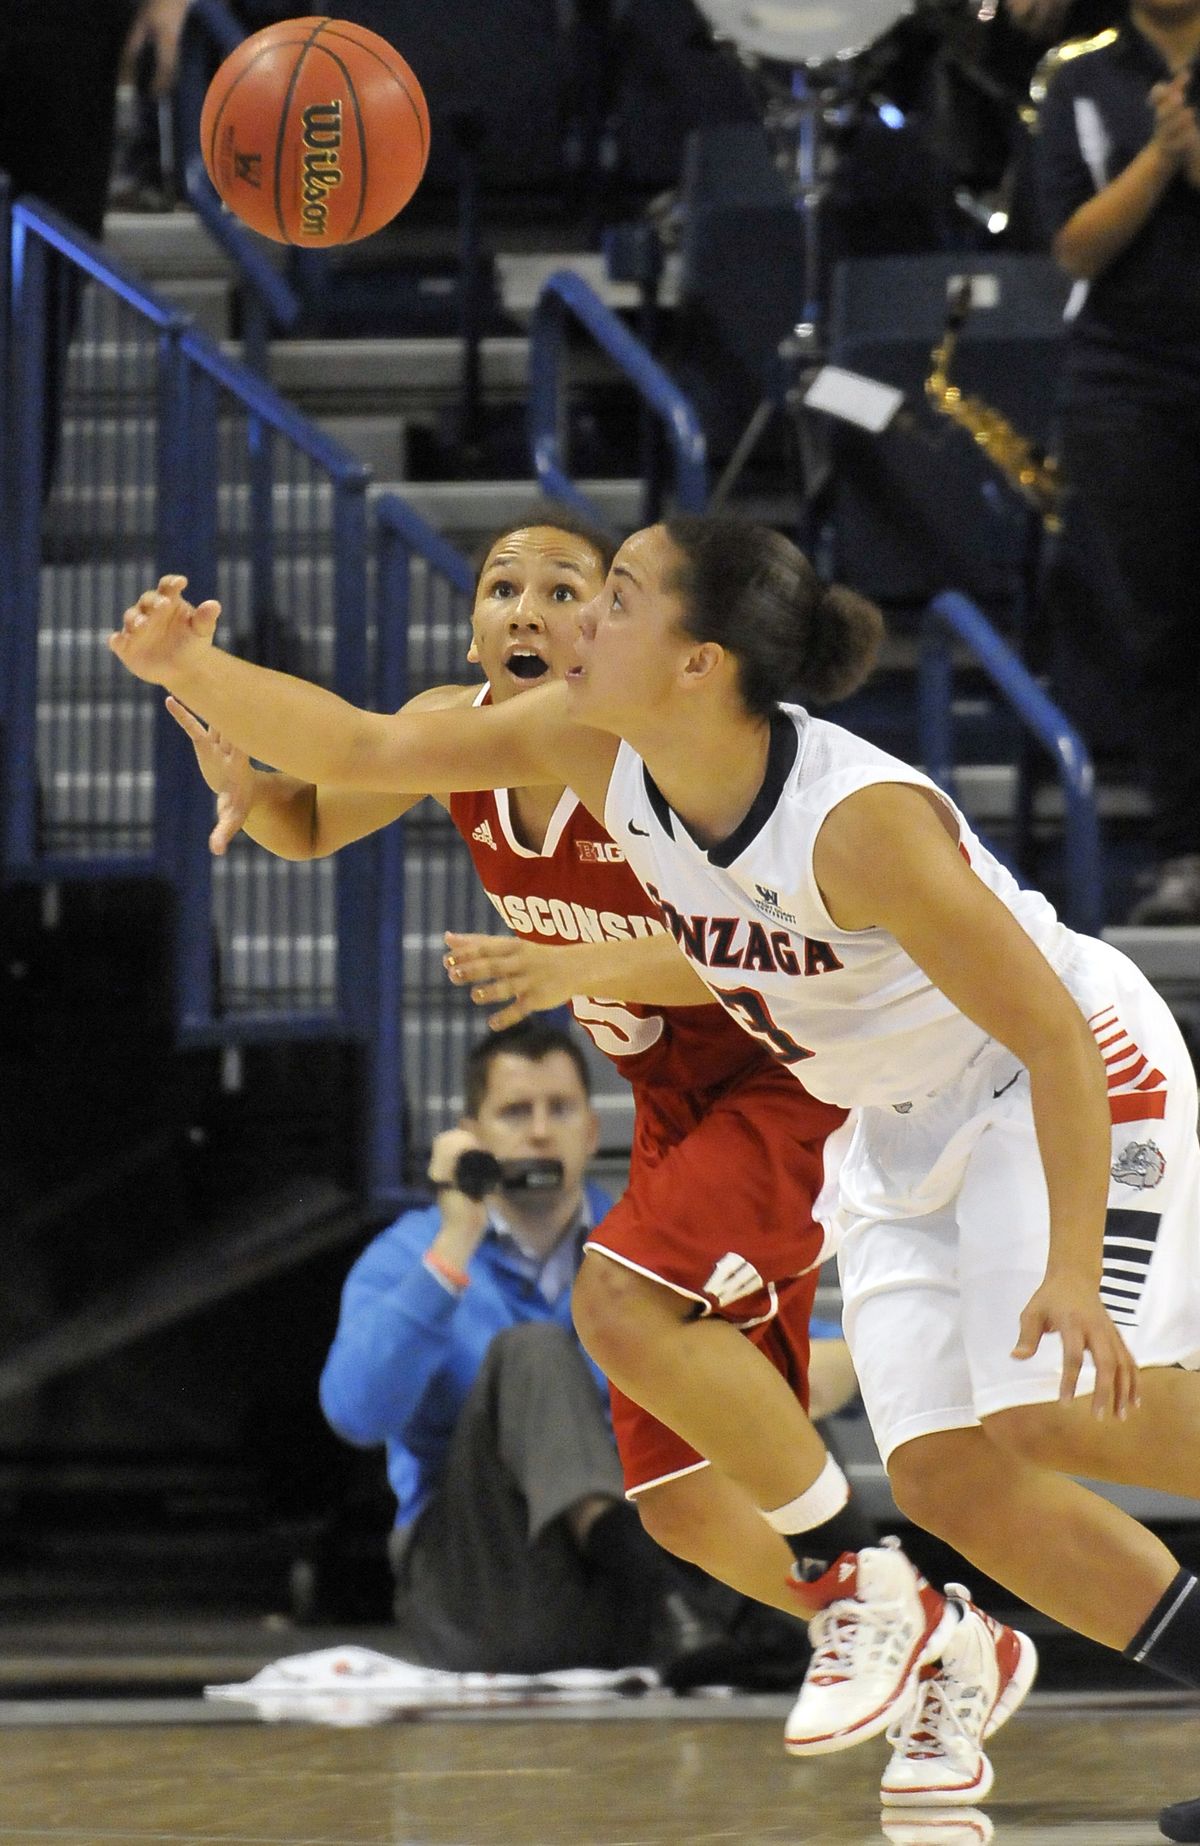 Gonzaga’s Haiden Palmer, right, tips the ball away from Wisconsin’s Morgan Paige for a steal. (Jesse Tinsley)